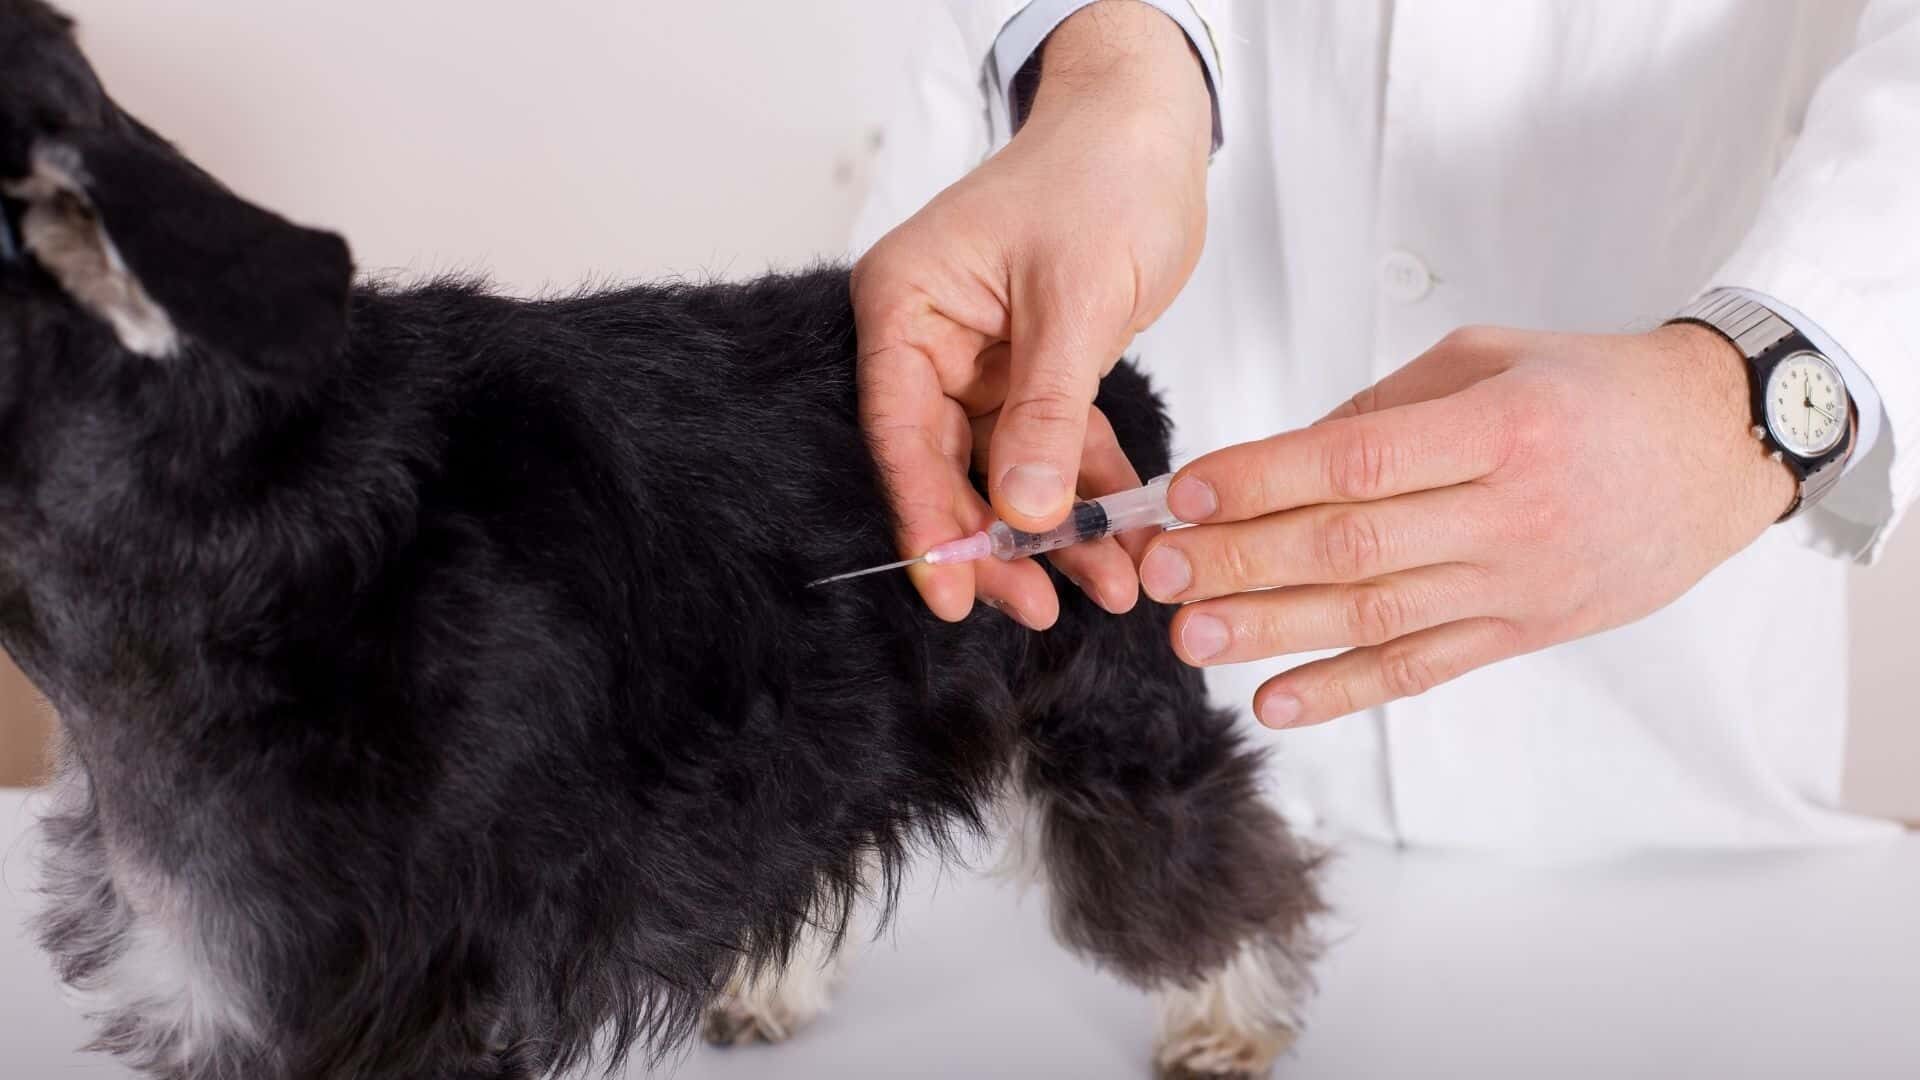 How to vaccine a dog?